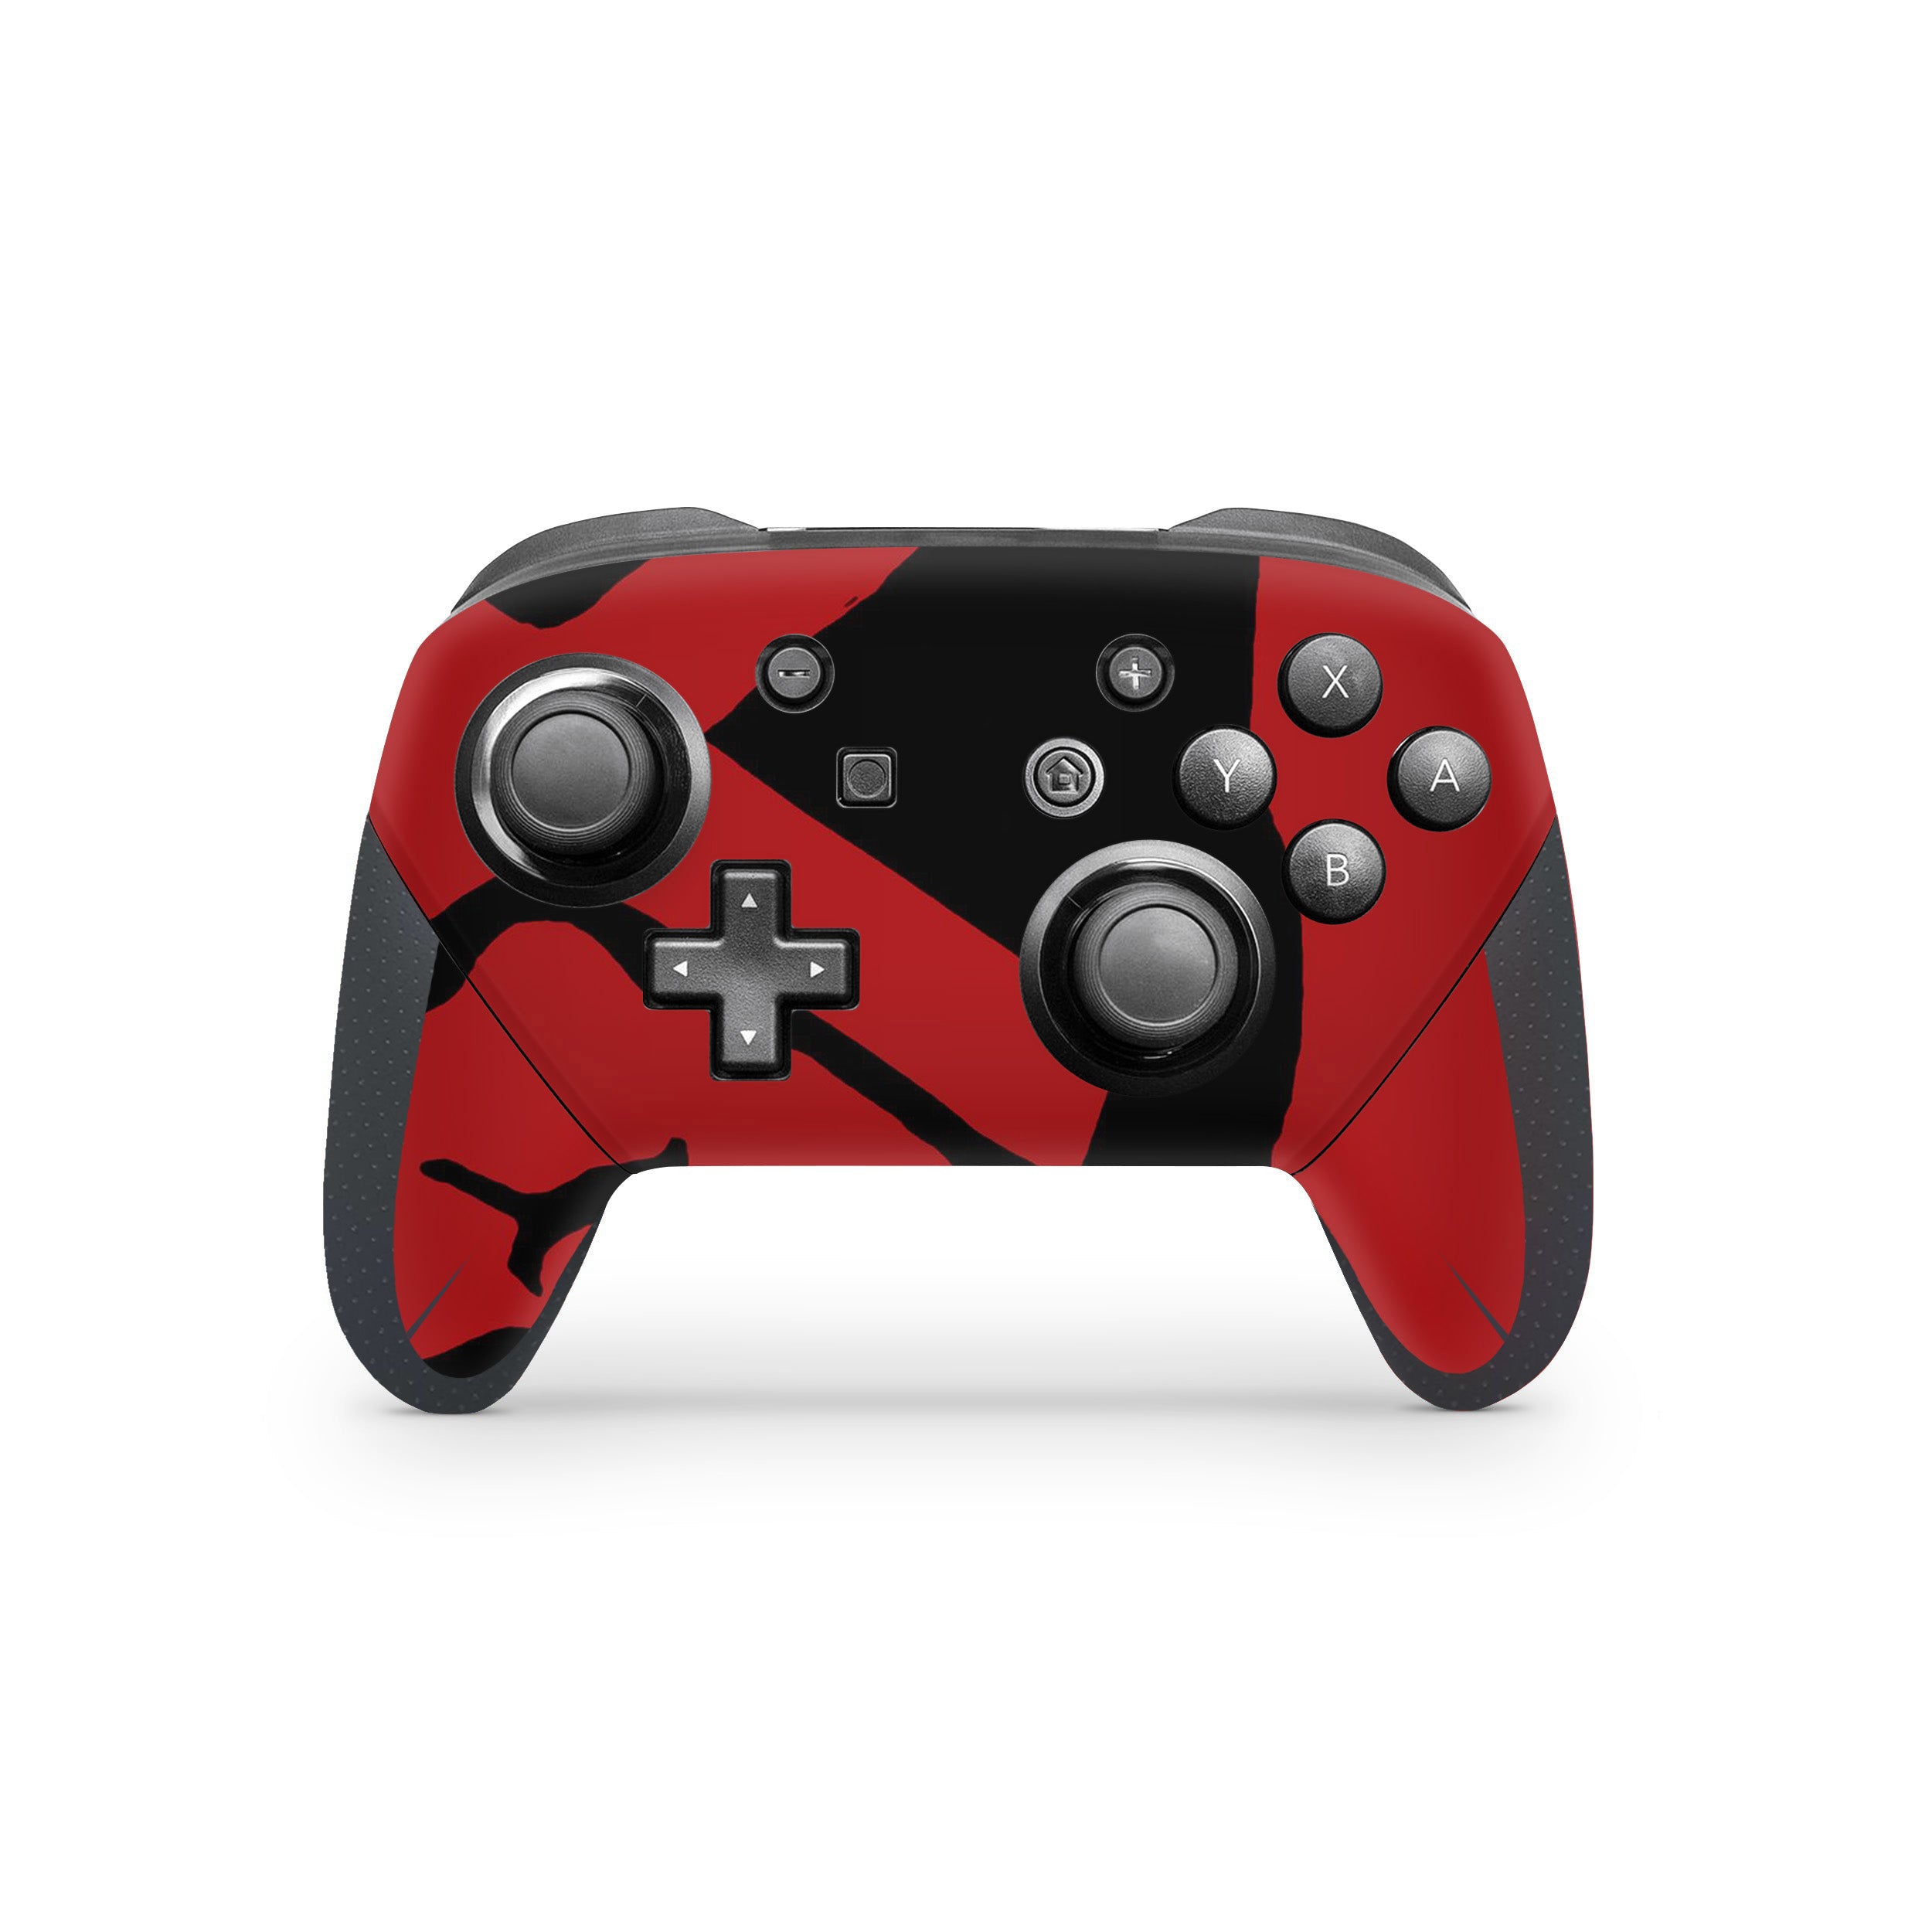 A video game skin featuring a Marvel X Men Cyclops design for the Switch Pro Controller.